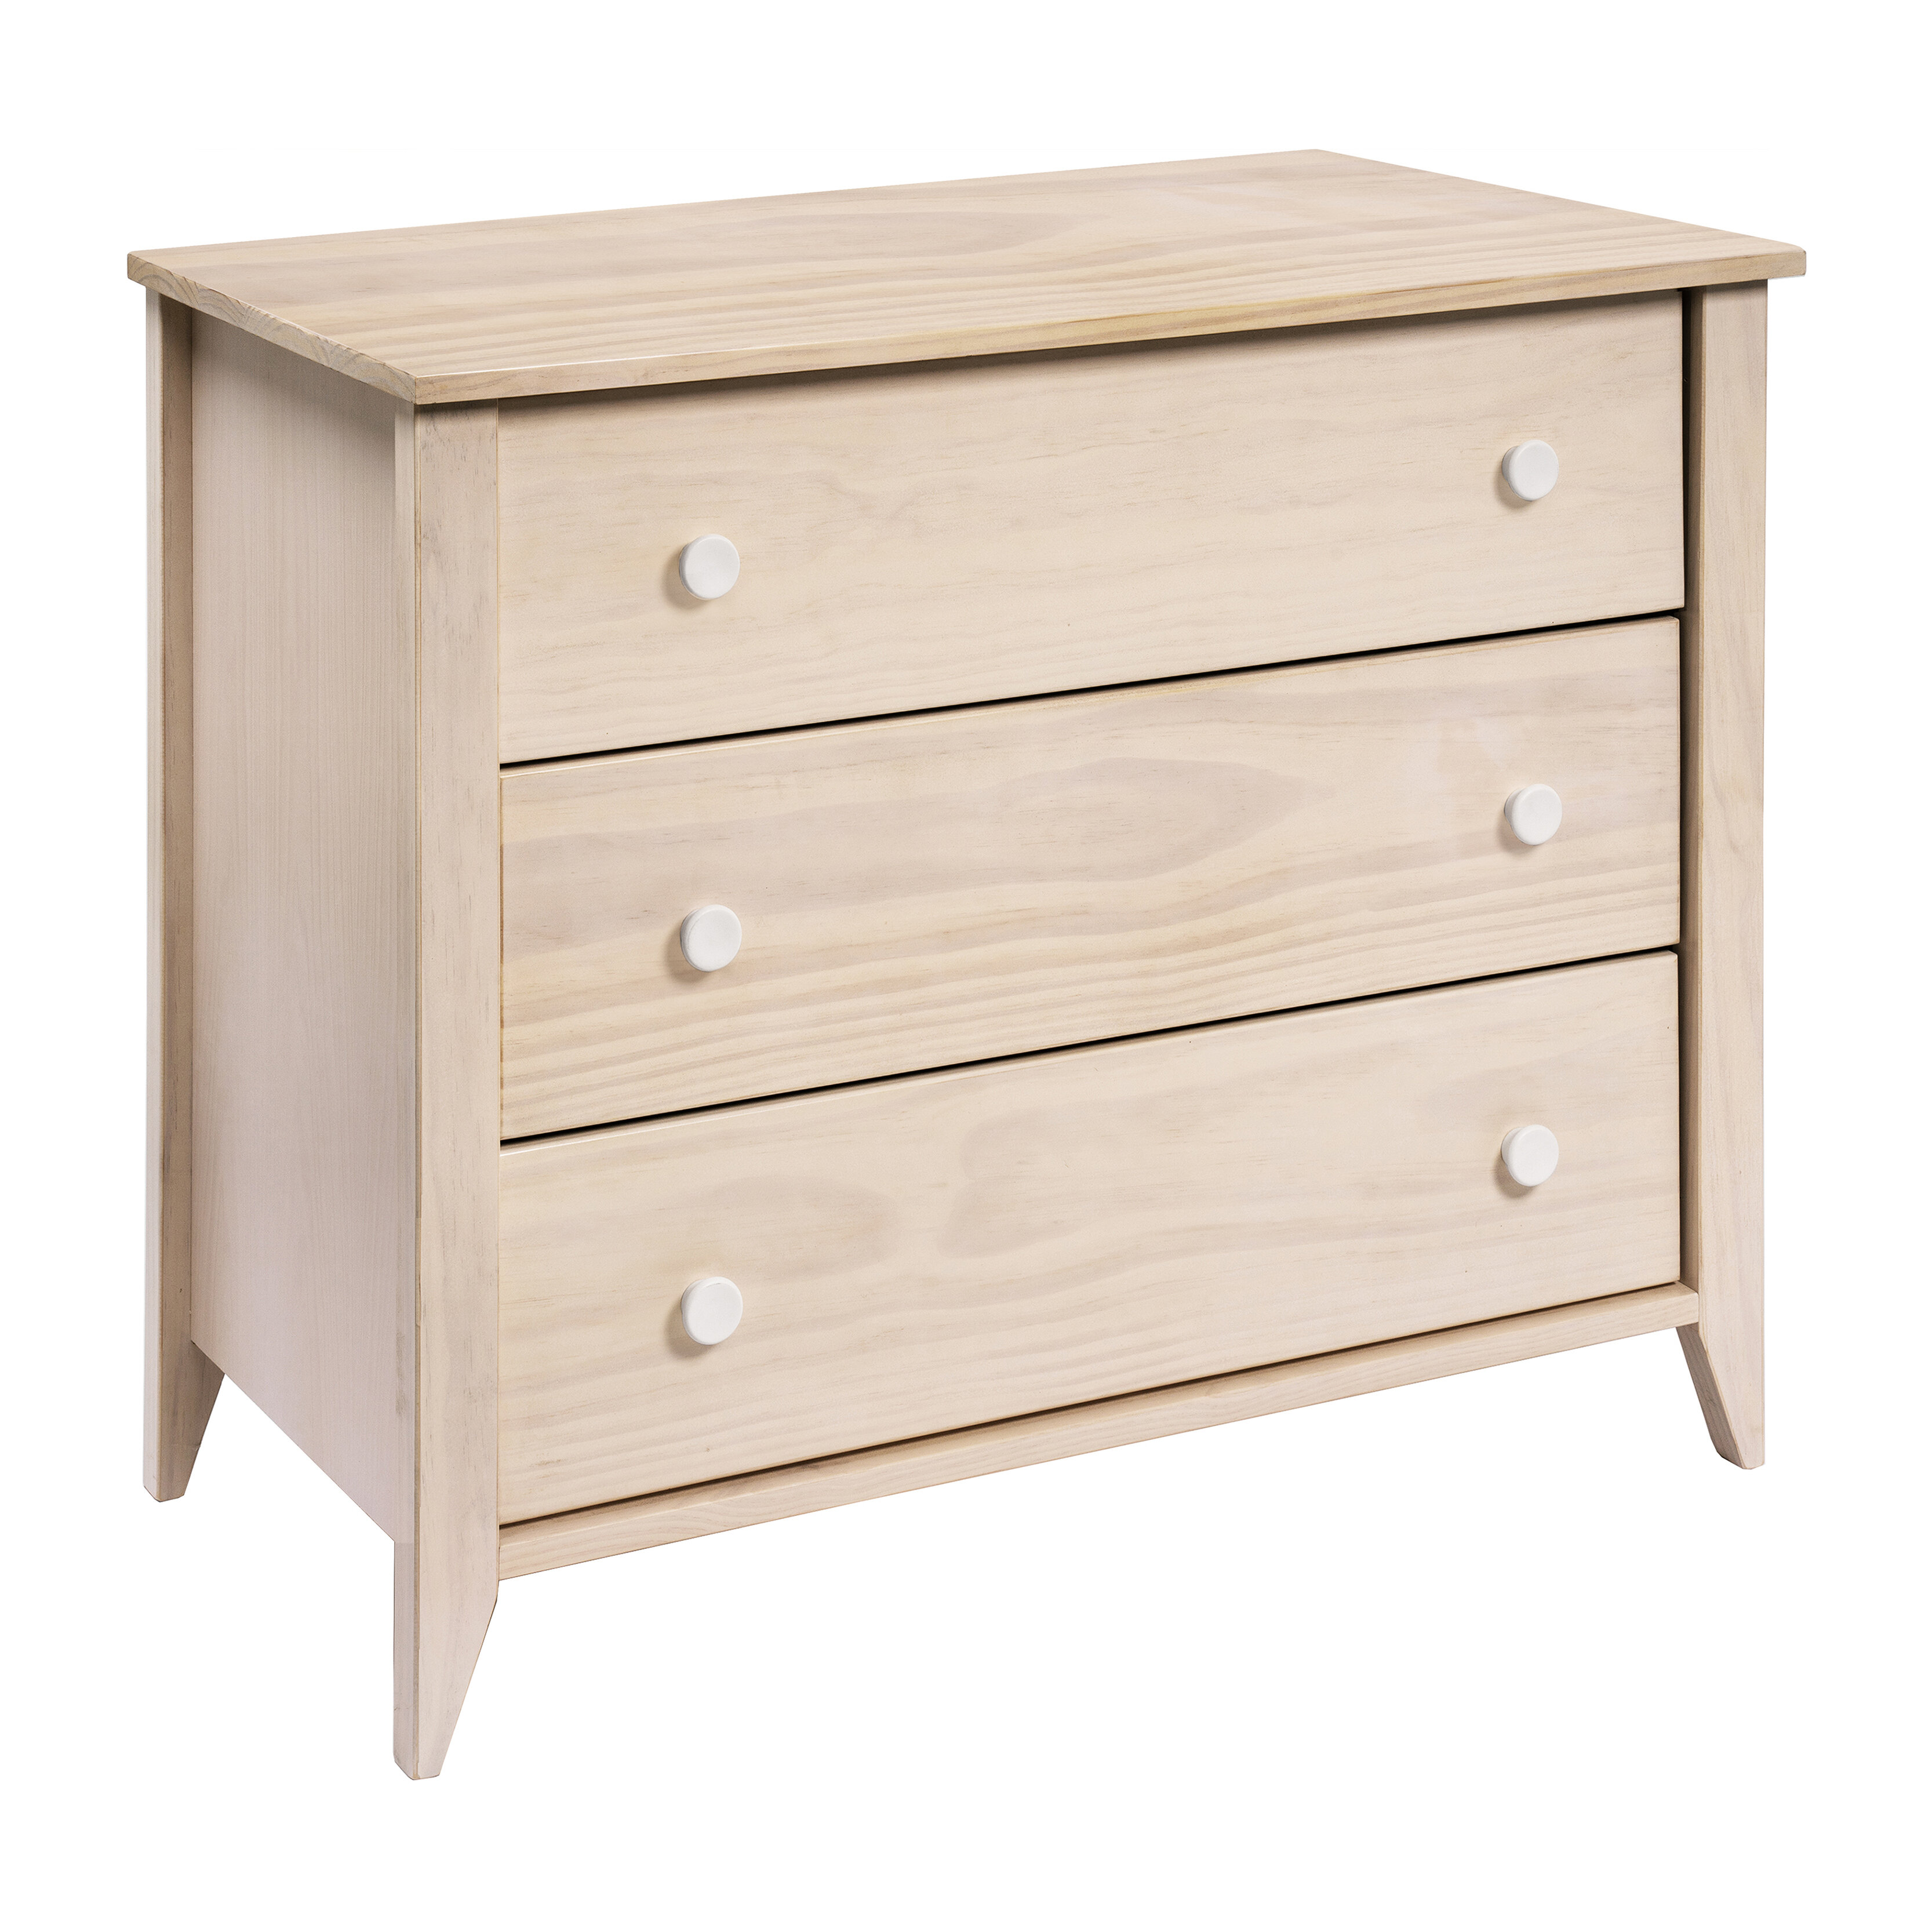 Sprout Changing Table Dresser \u0026 Reviews 